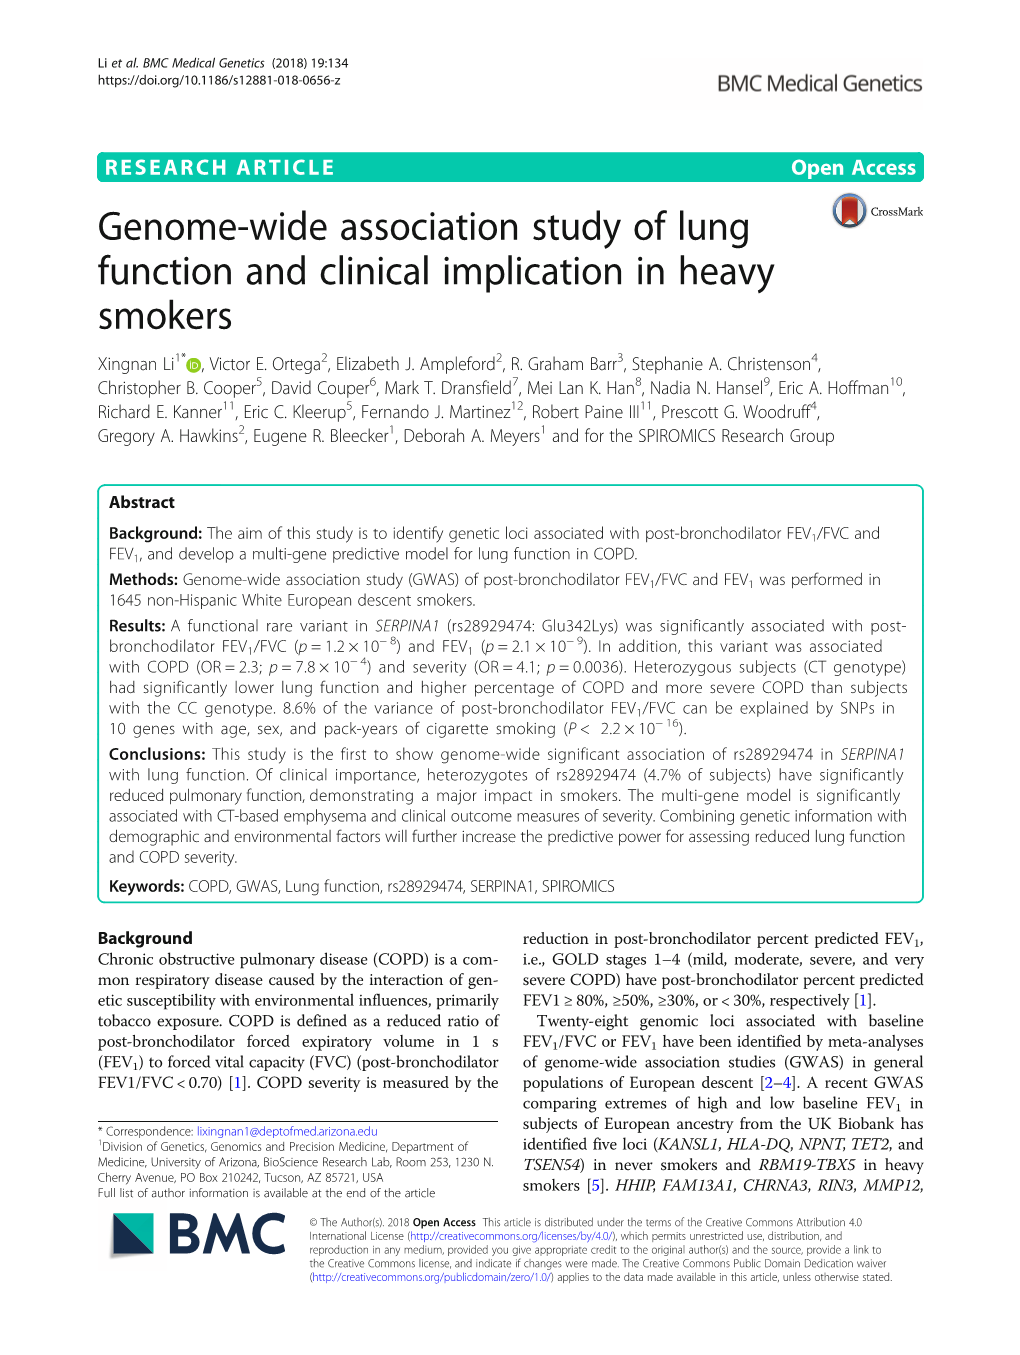 Genome-Wide Association Study of Lung Function and Clinical Implication in Heavy Smokers Xingnan Li1* , Victor E